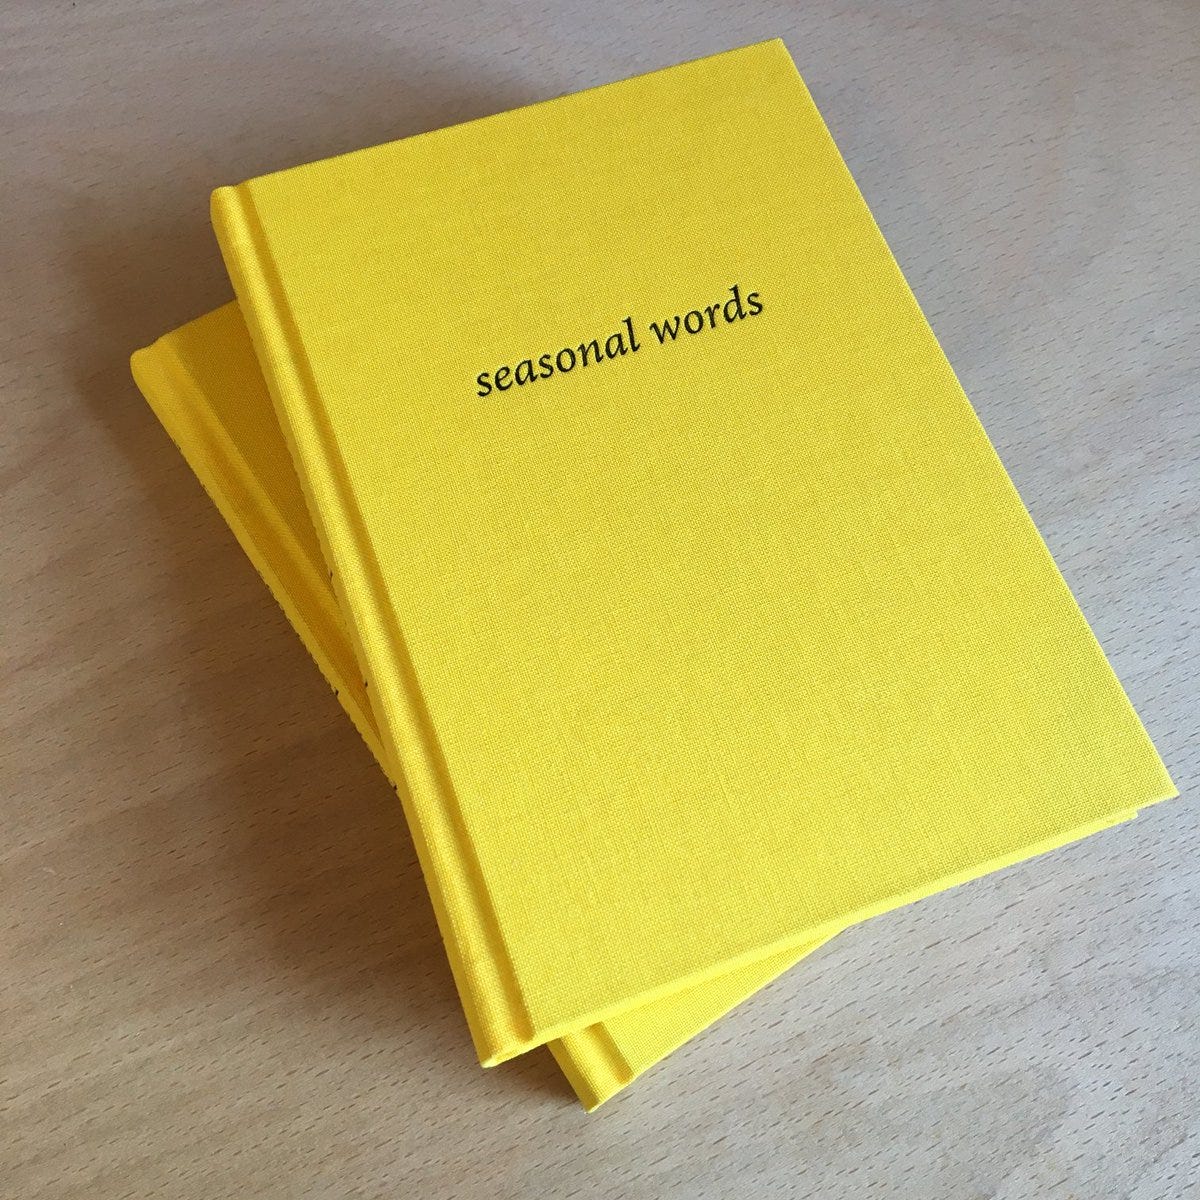 A small stack of books with bright yellow clothbound covers with "seasonal words" embossed in black.